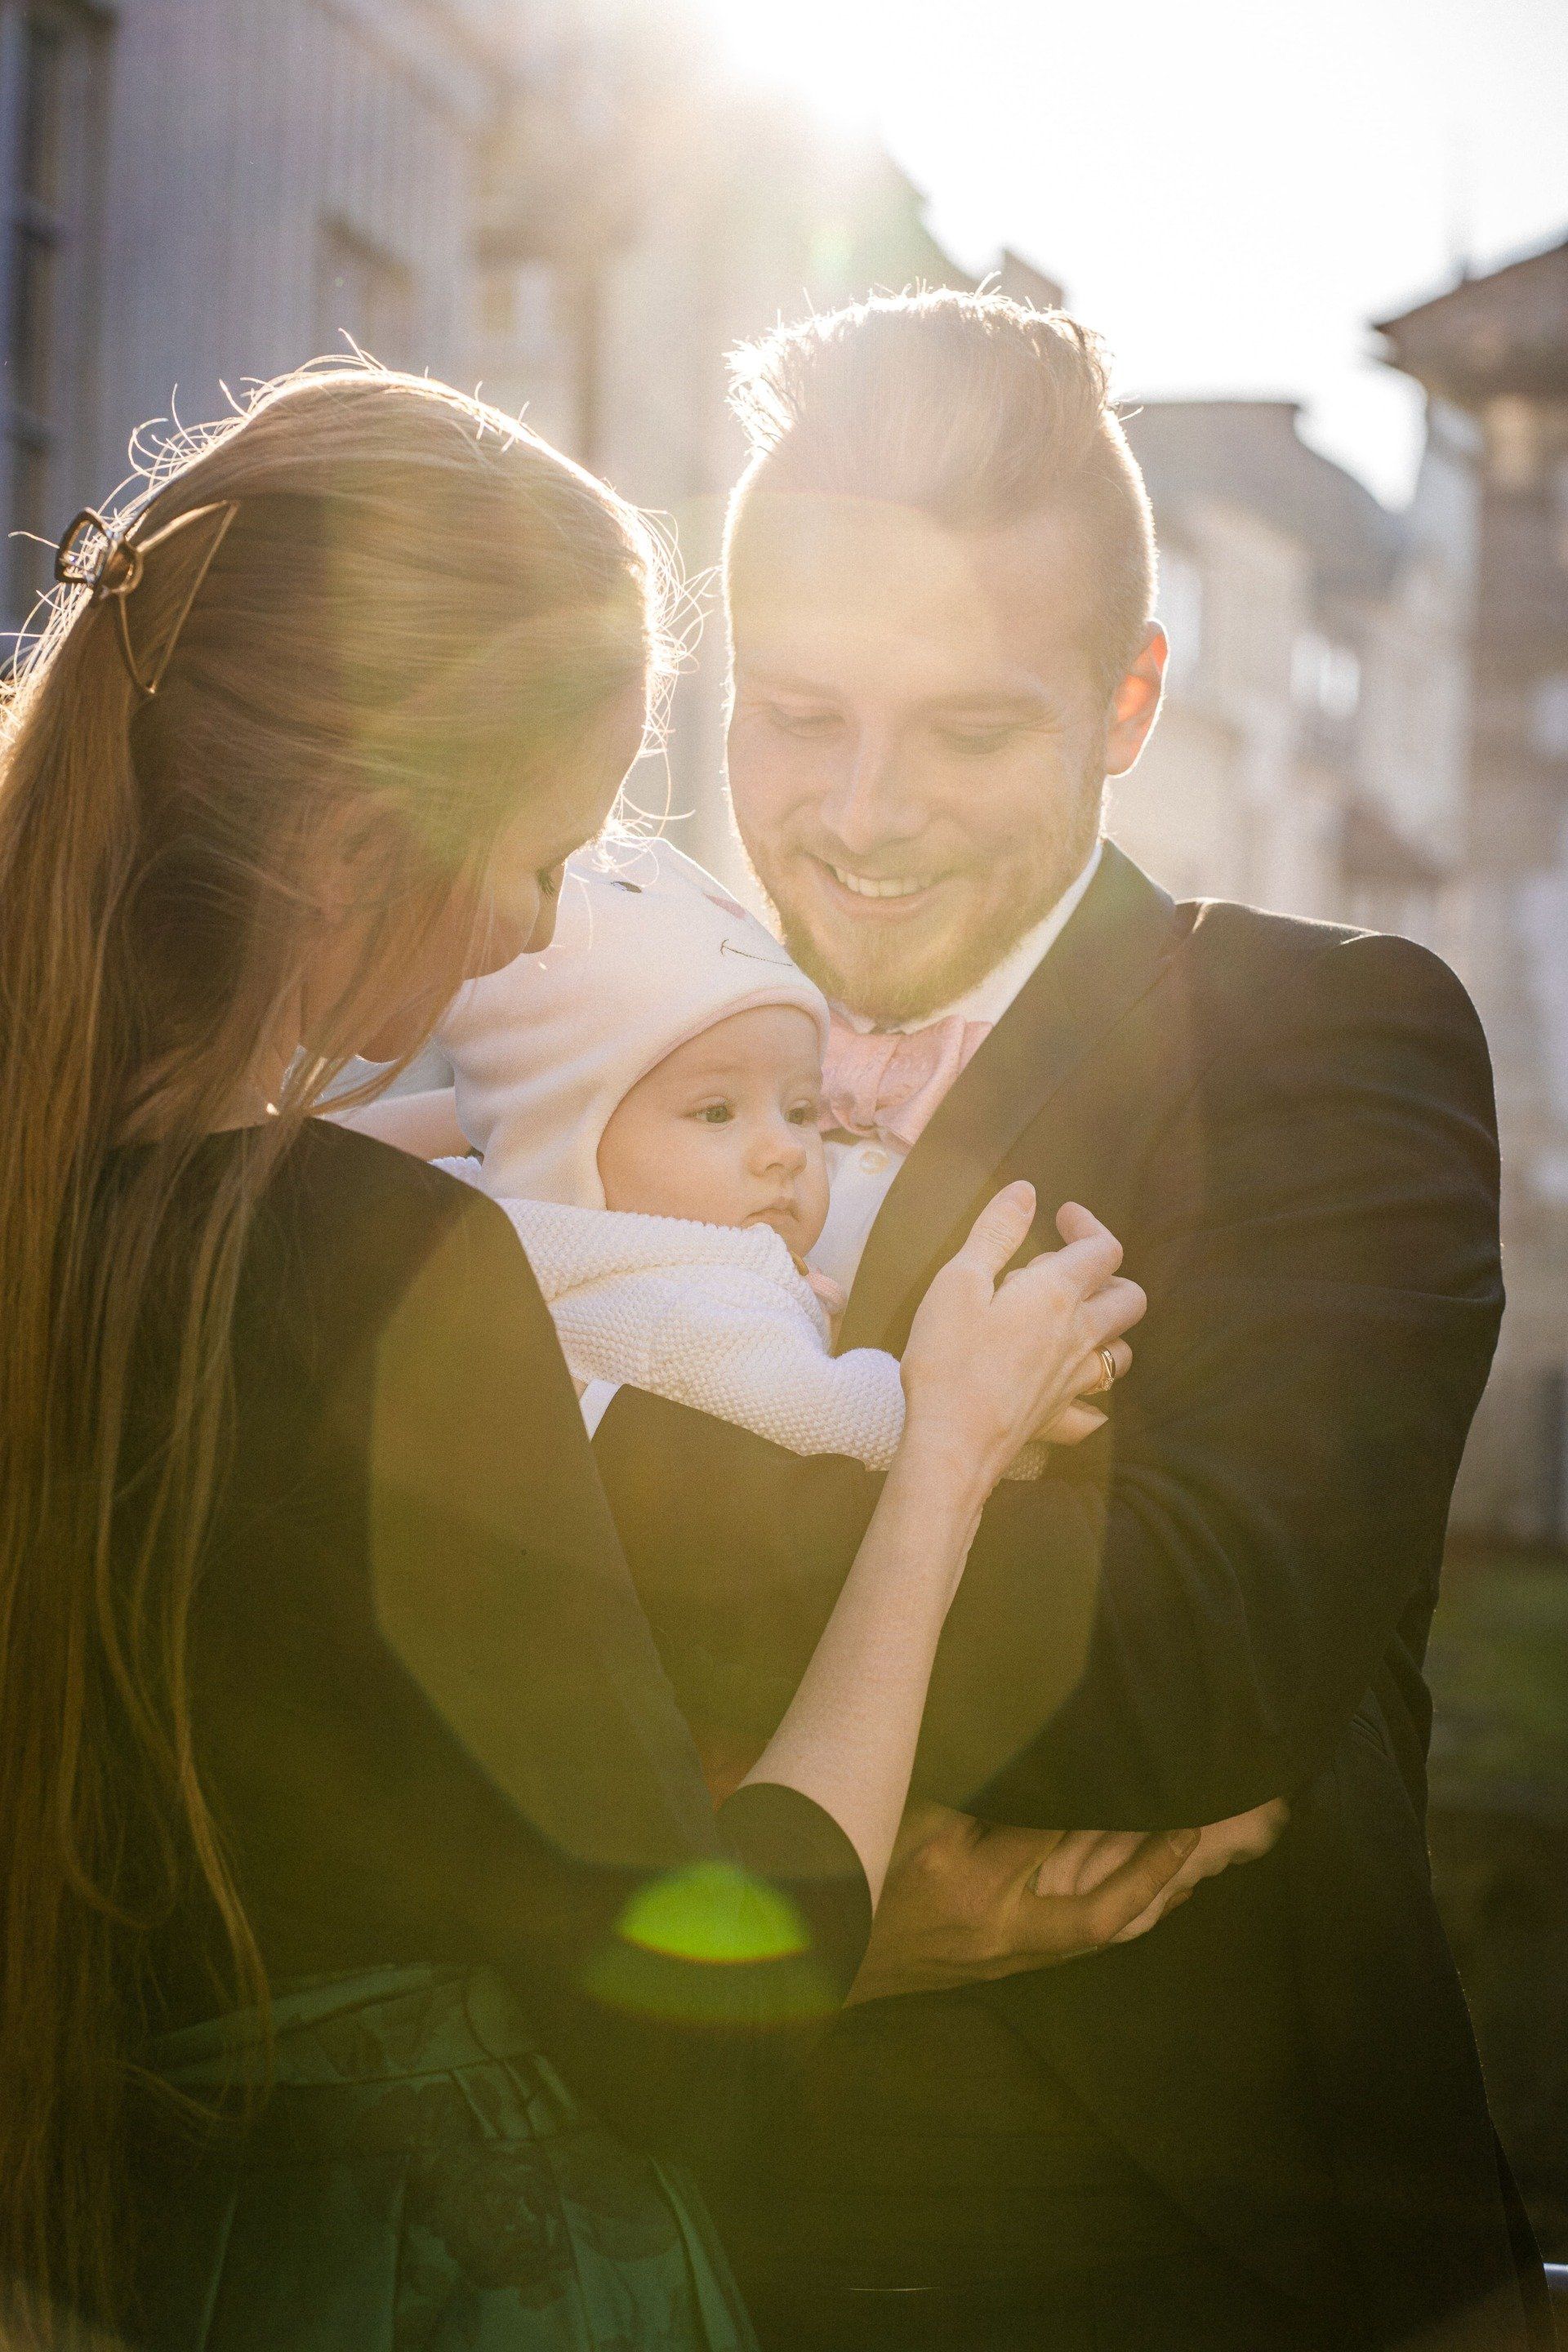 Familie Baby Kind Sonne Fotoshooting